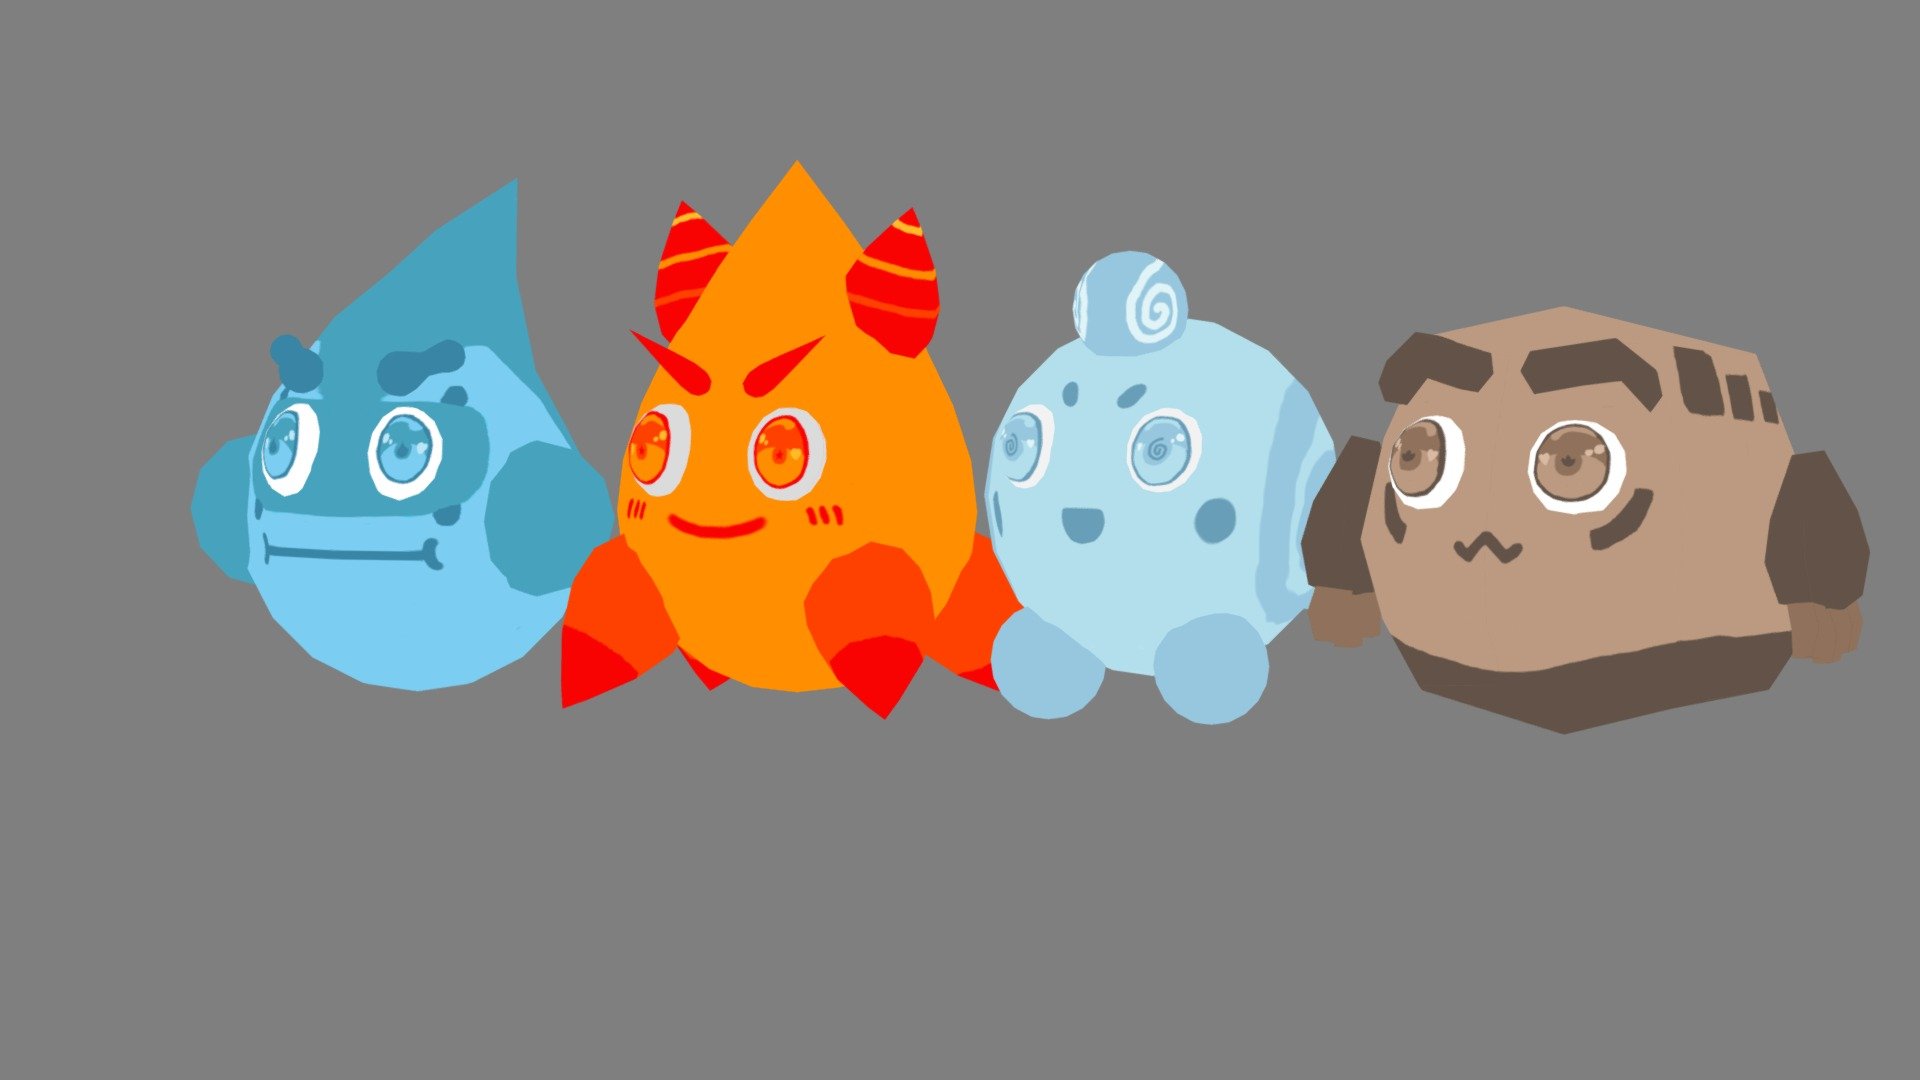 Im making a small puzzle game for school, and wanted to make something around the four elements. Since cute seems to be my go to modus operandi, I decided to crank these 4 little guys out. I hope you enjoy them! - Elemental puzzlers - 3D model by ranbul 3d model